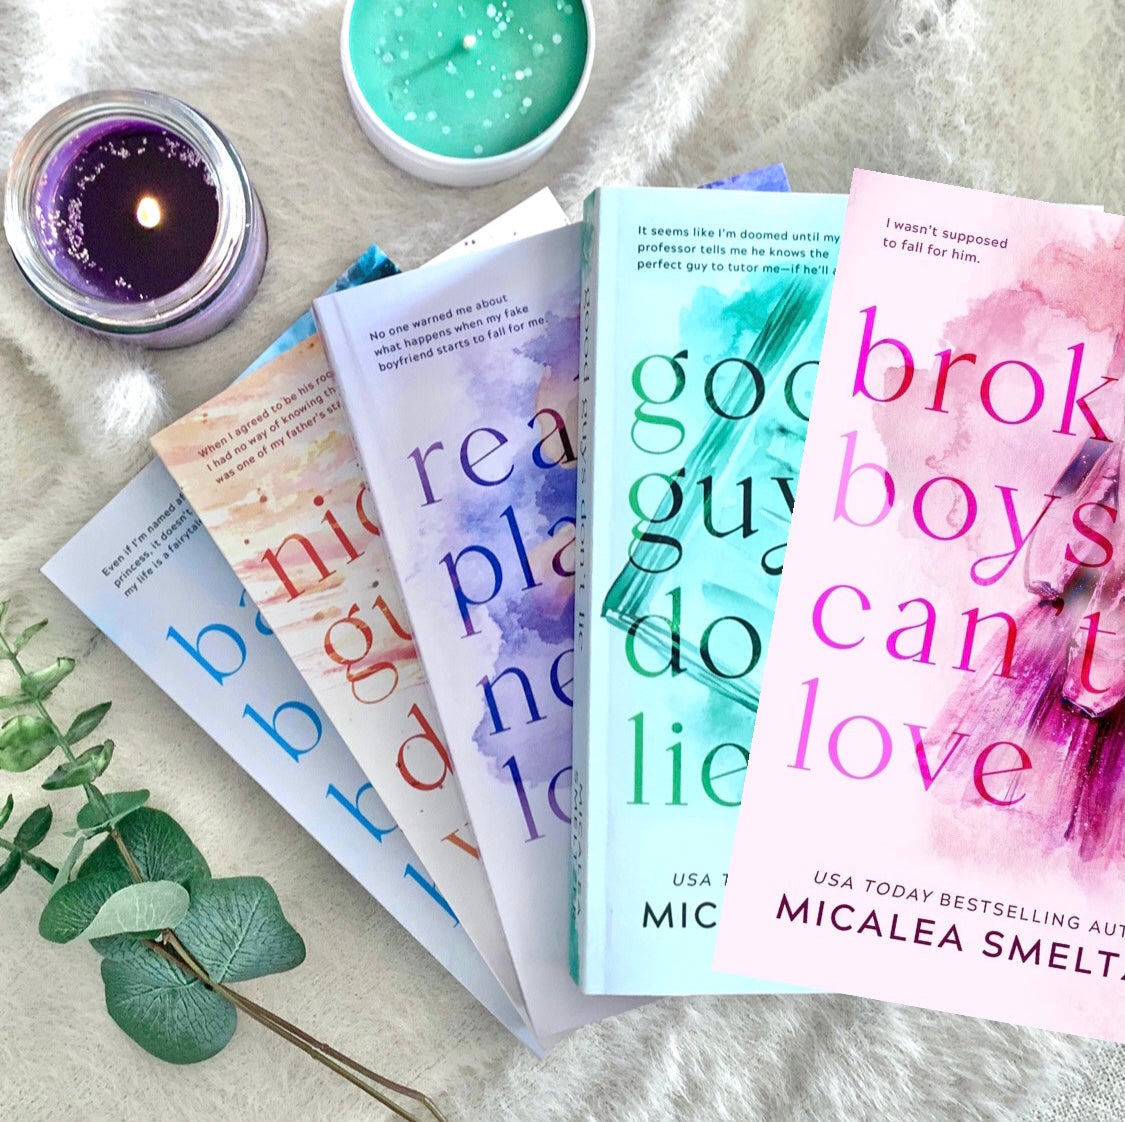 The Boys Series - Special Editions by Micalea Smeltzer